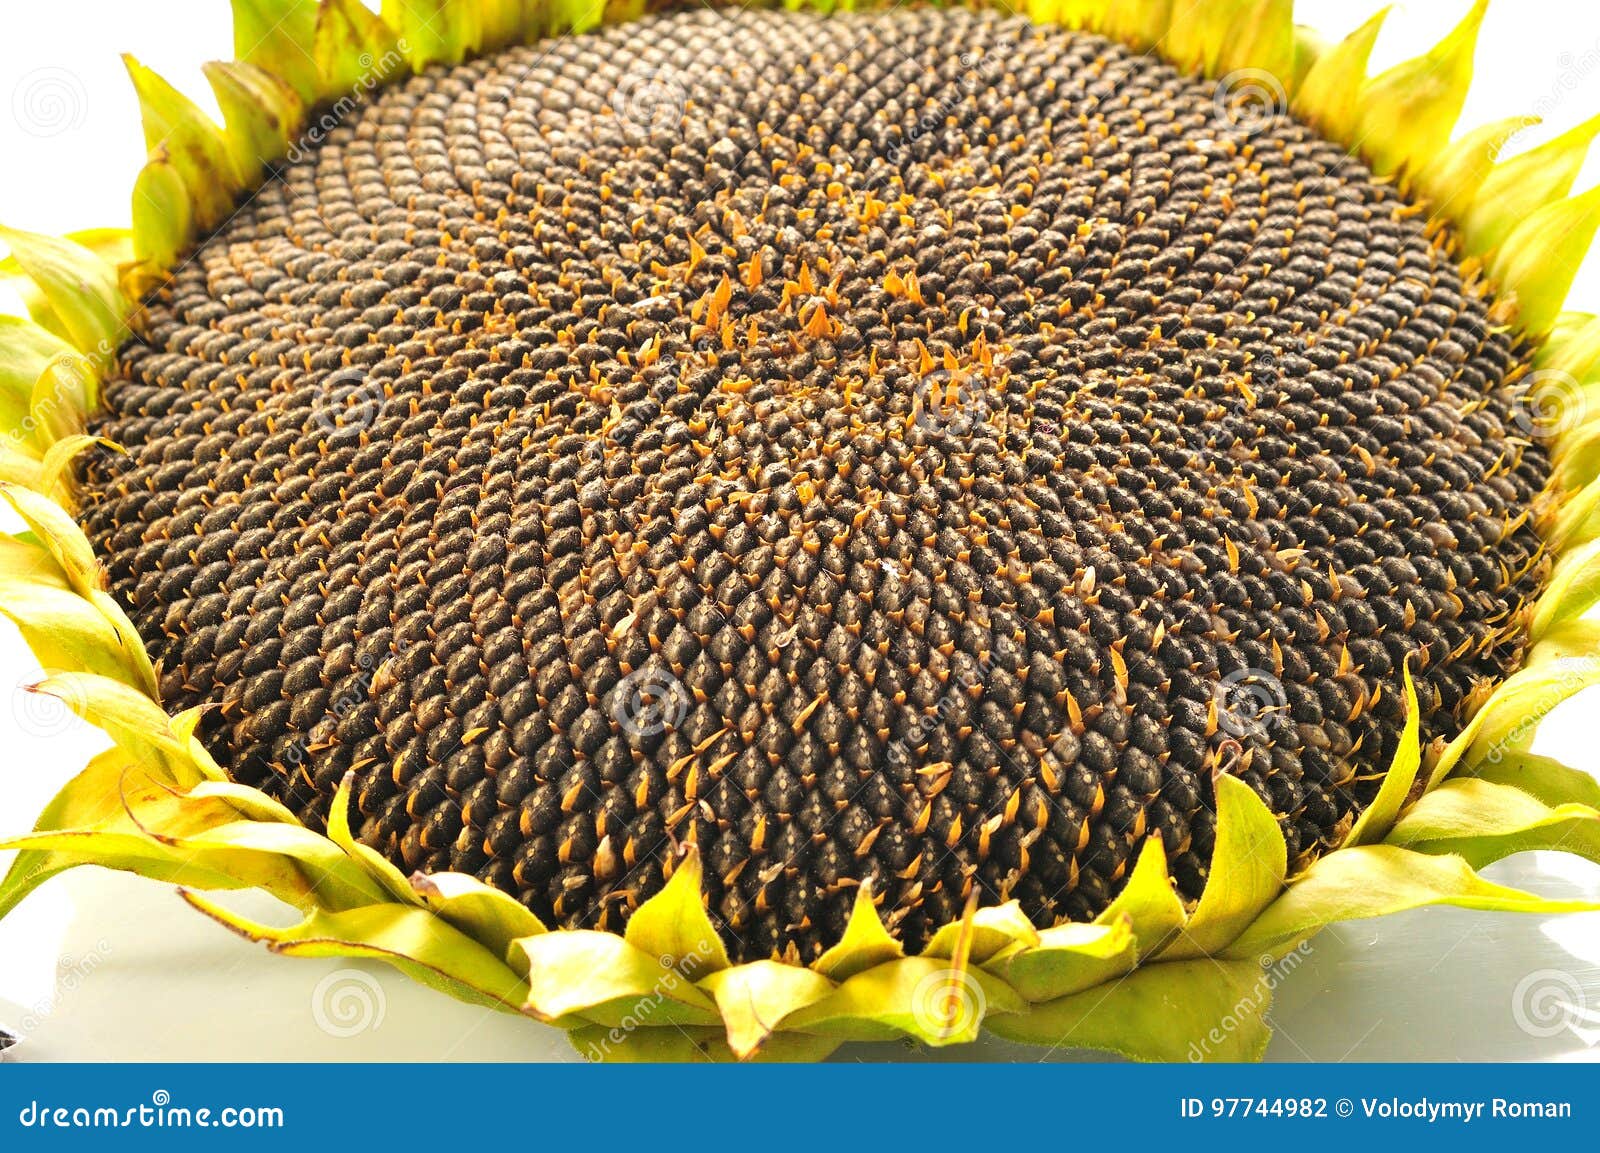 Mature Sunflower Head with Seeds Stock Photo - Image of autumn ...